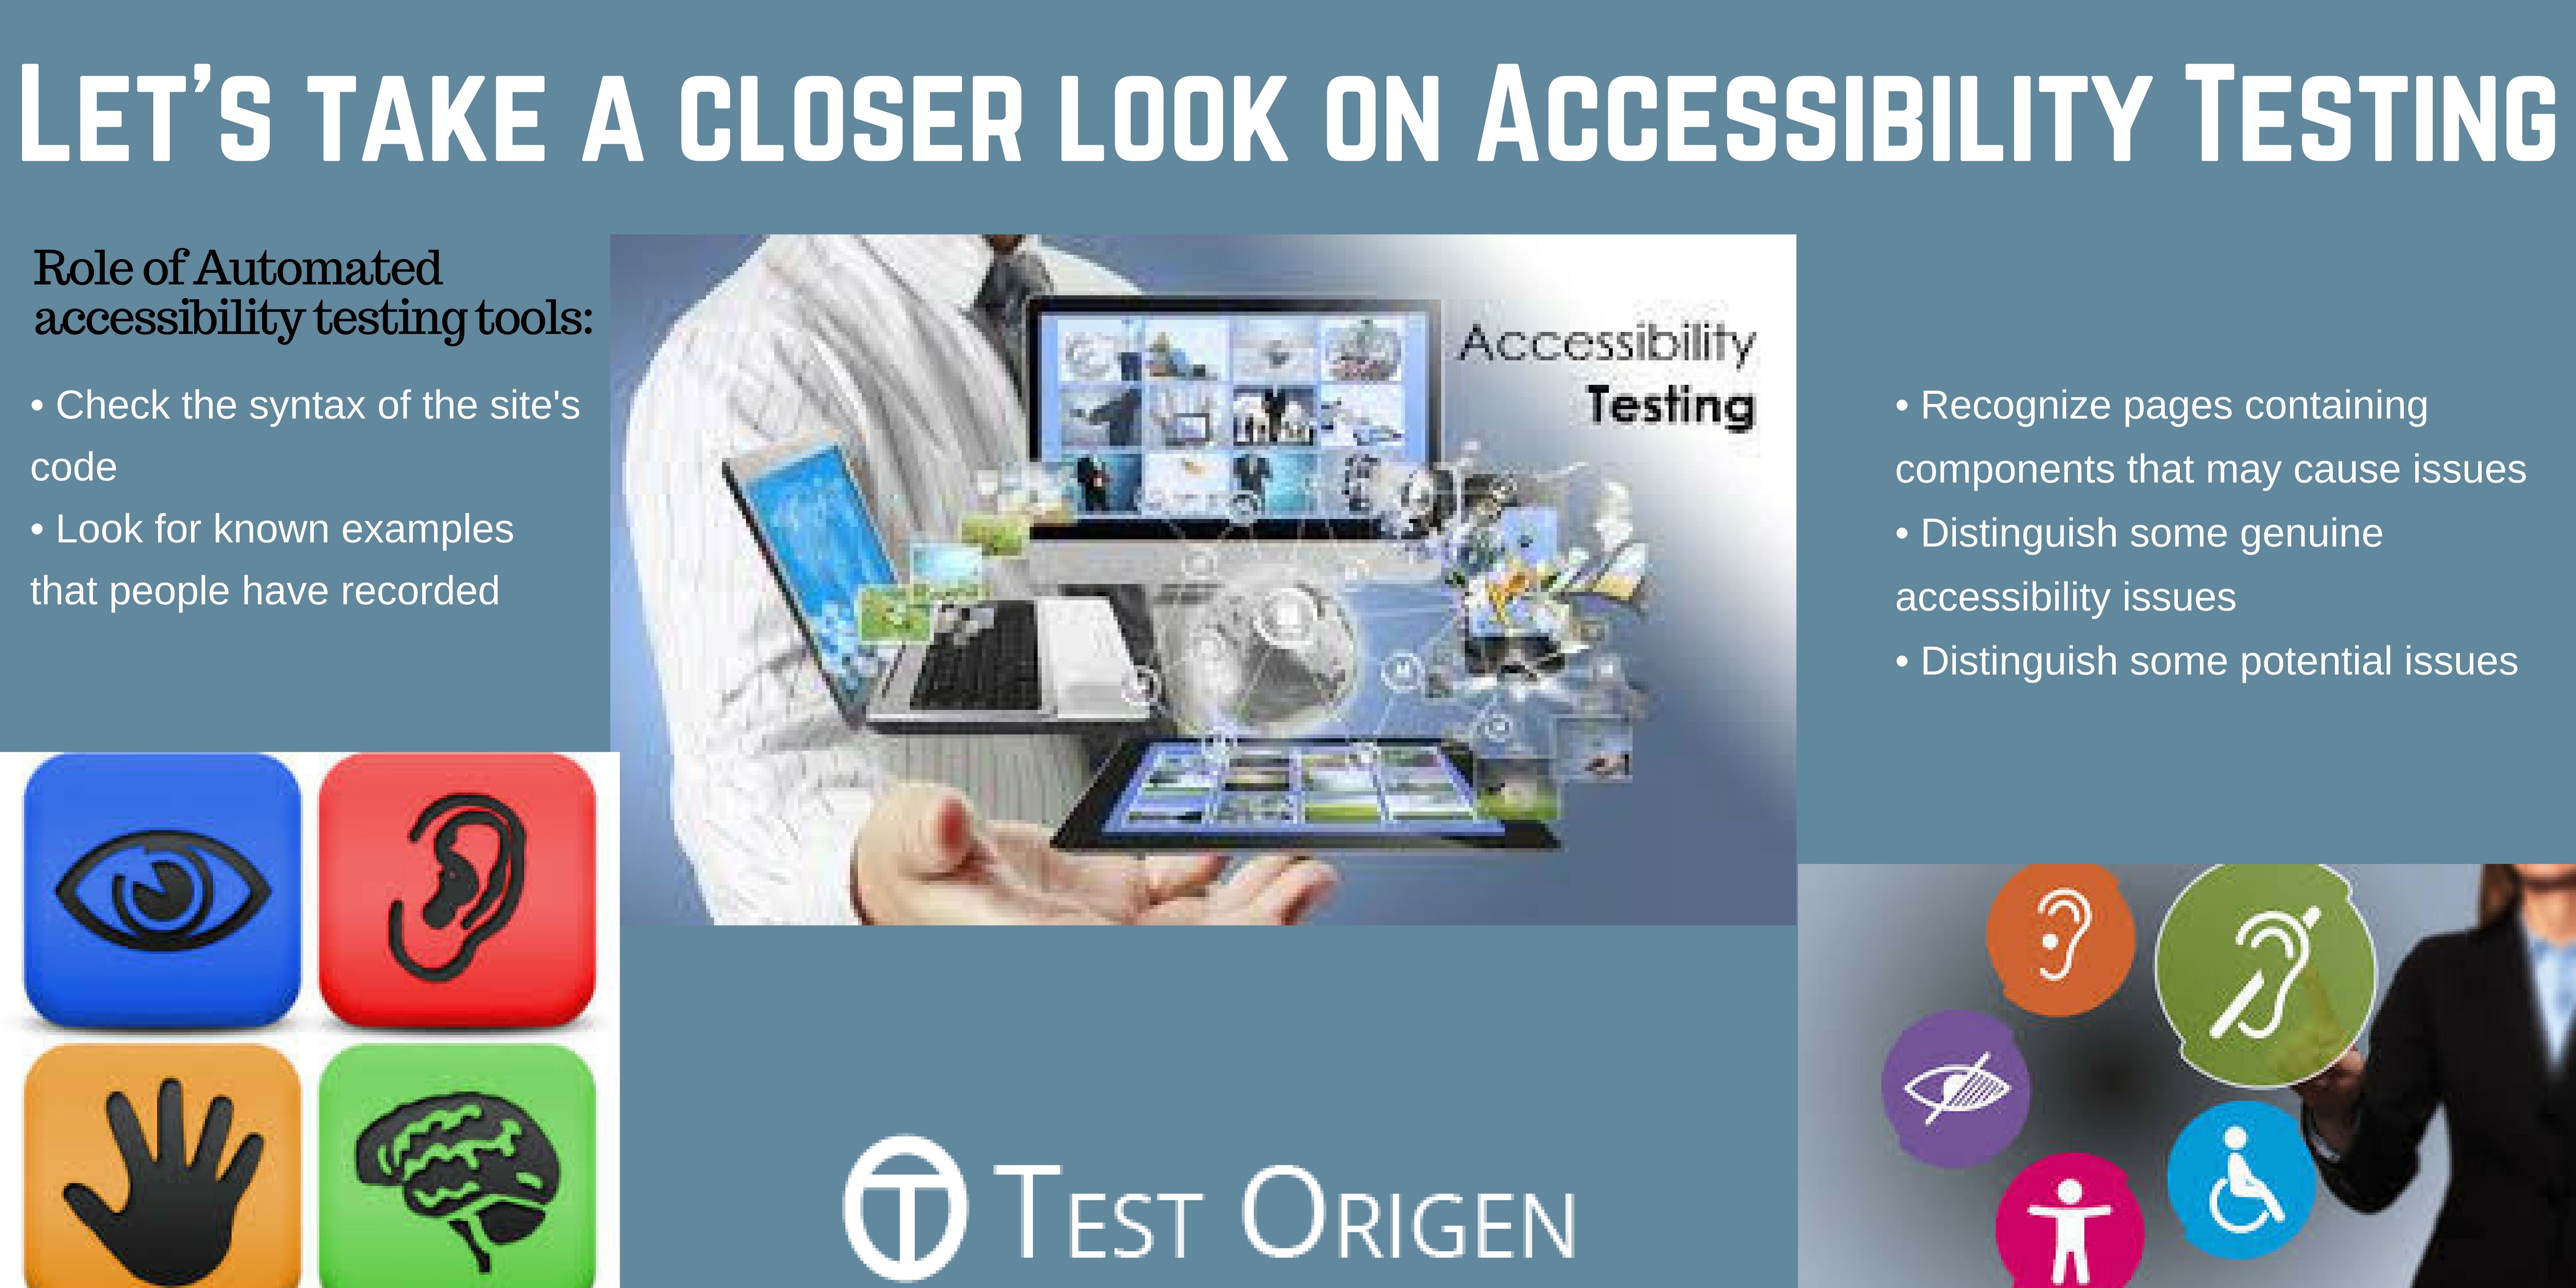 Let’s take a closer look on Accessibility Testing